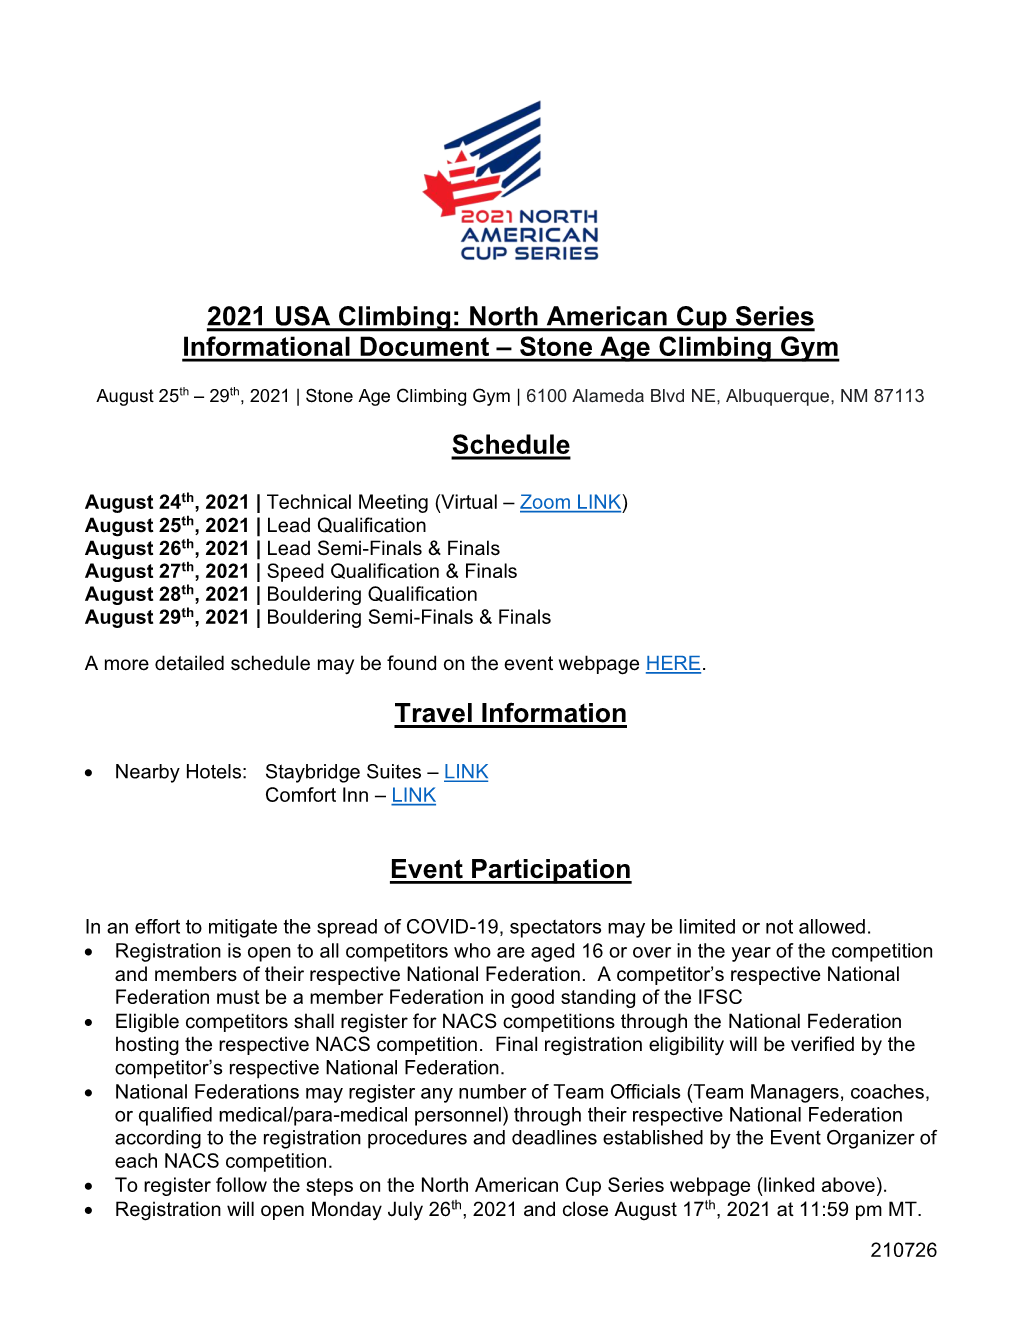 North American Cup Series Informational Document – Stone Age Climbing Gym